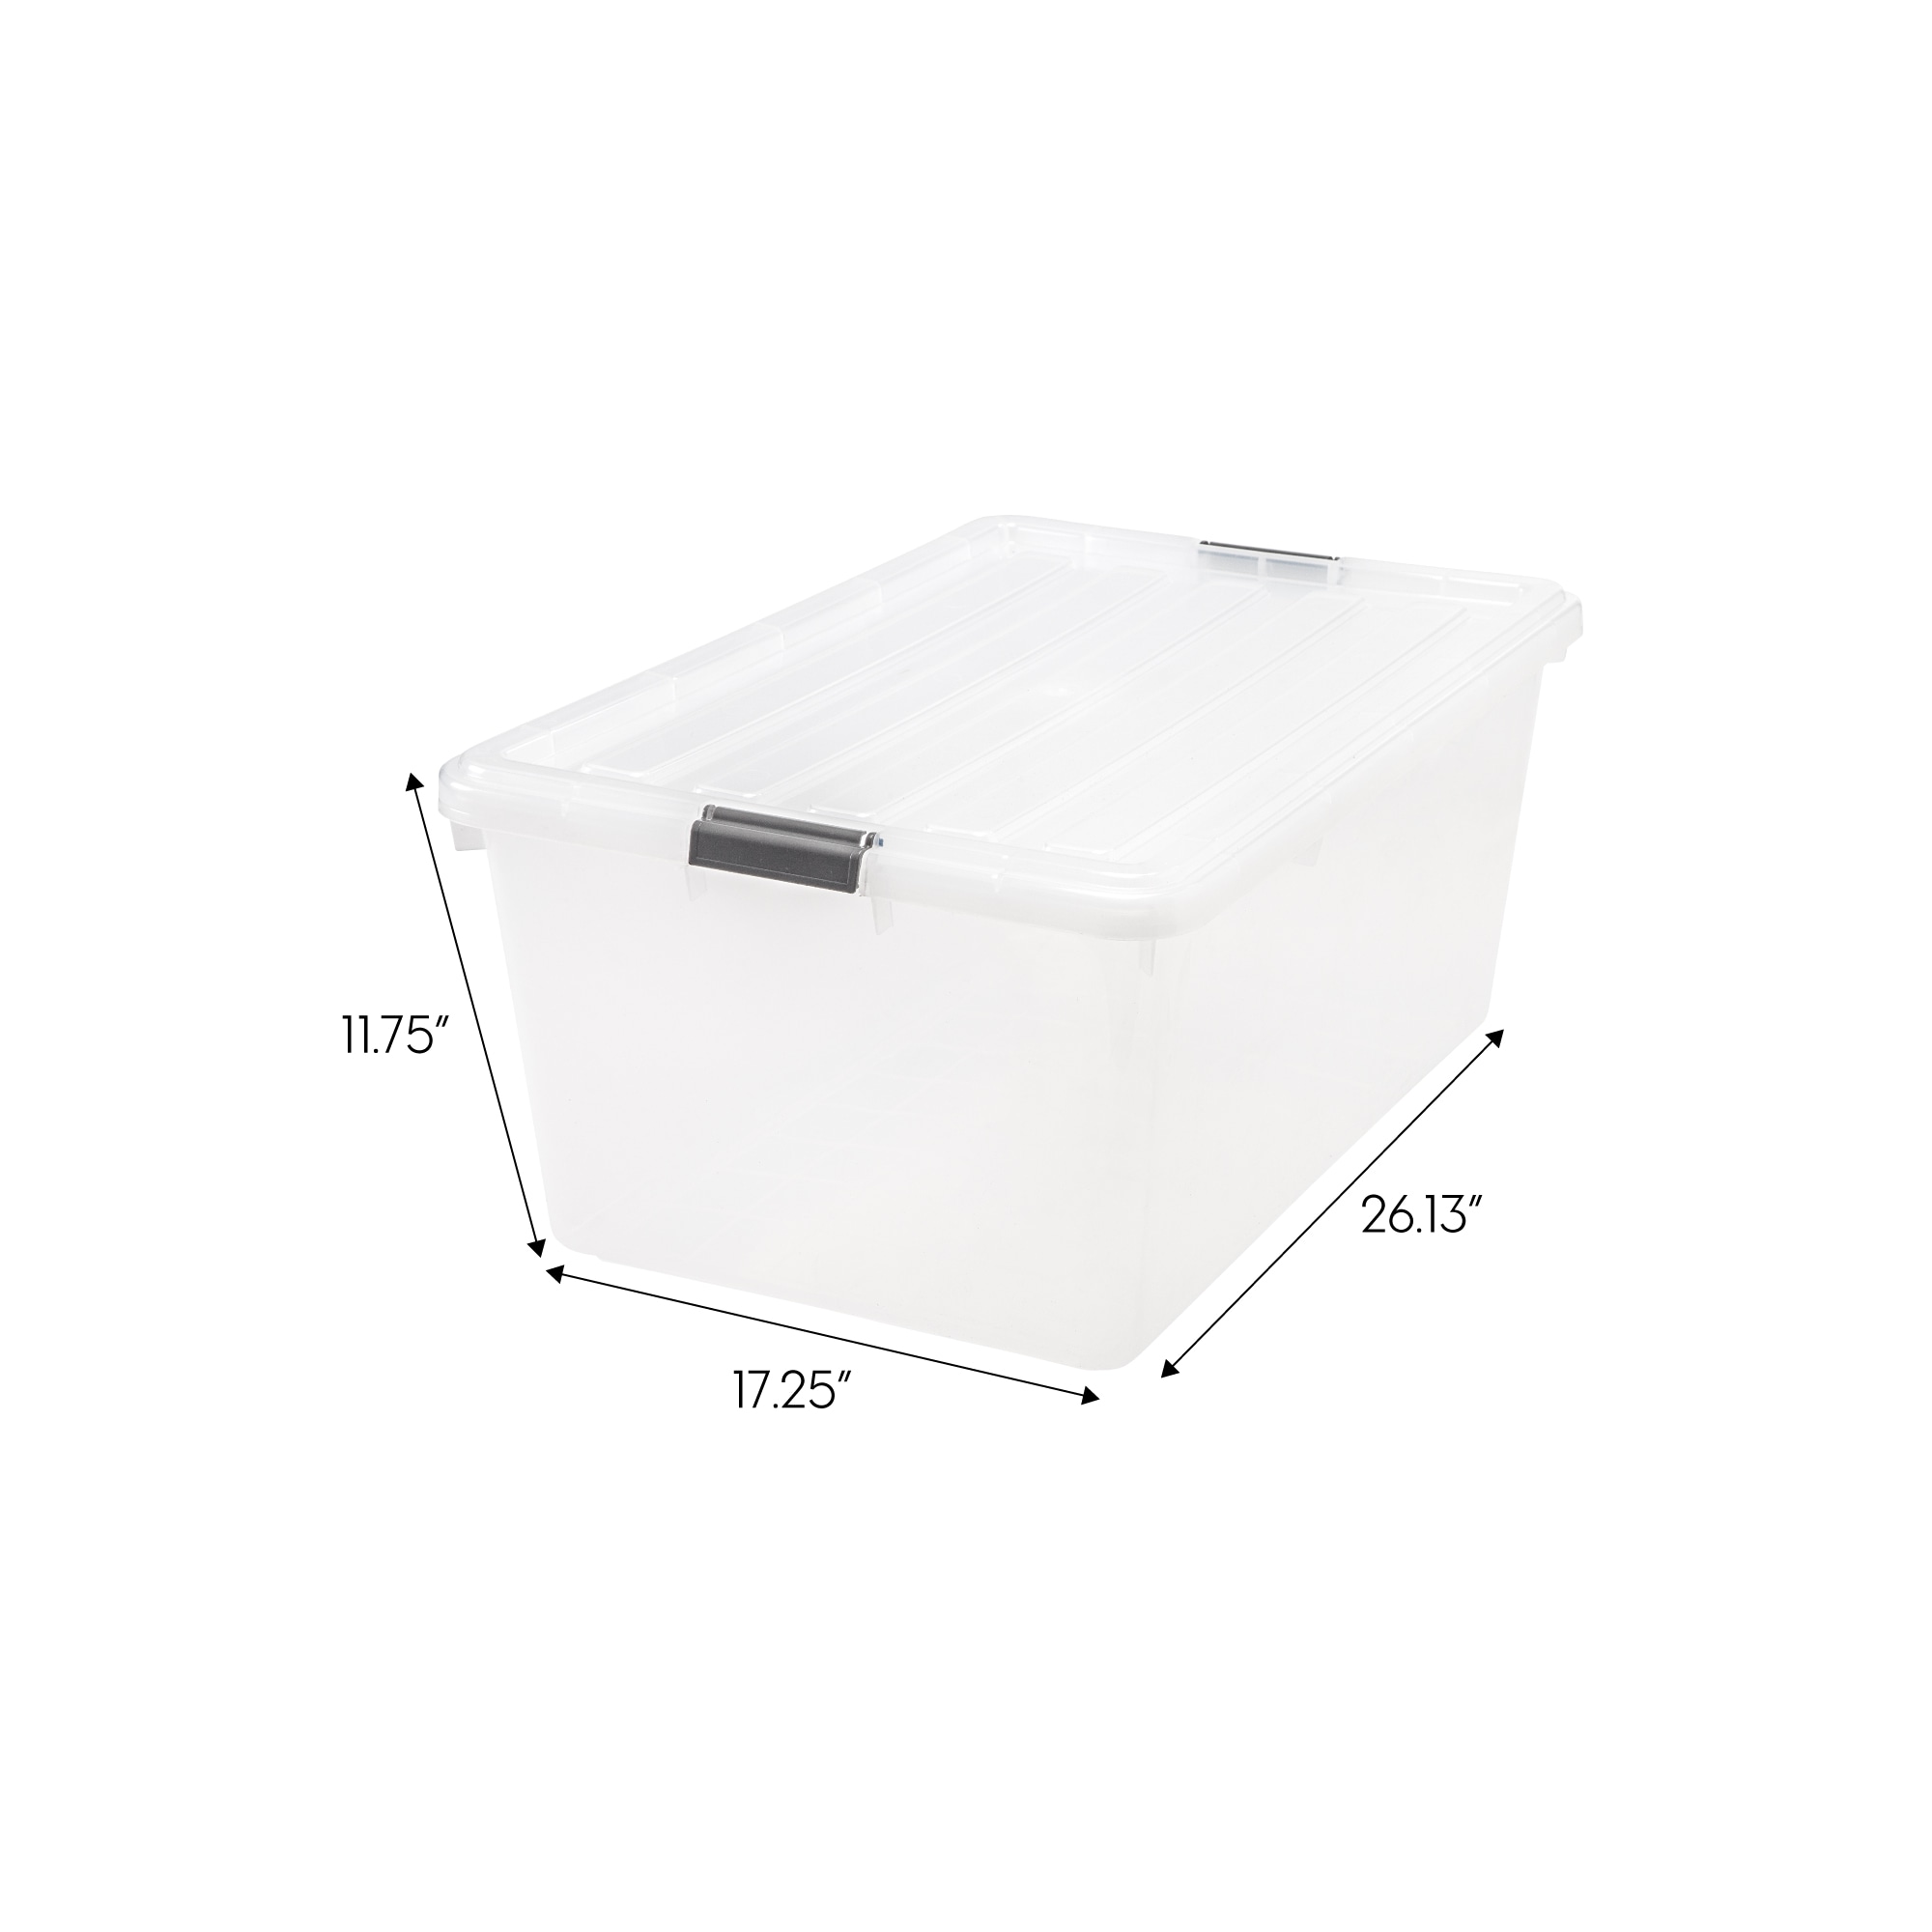 123 Quart Large Plastic Storage Bins Waterproof, Utility Tote Organizing Container Box with Buckle Down Lid, Collapsible Clear Plastic Storage Box